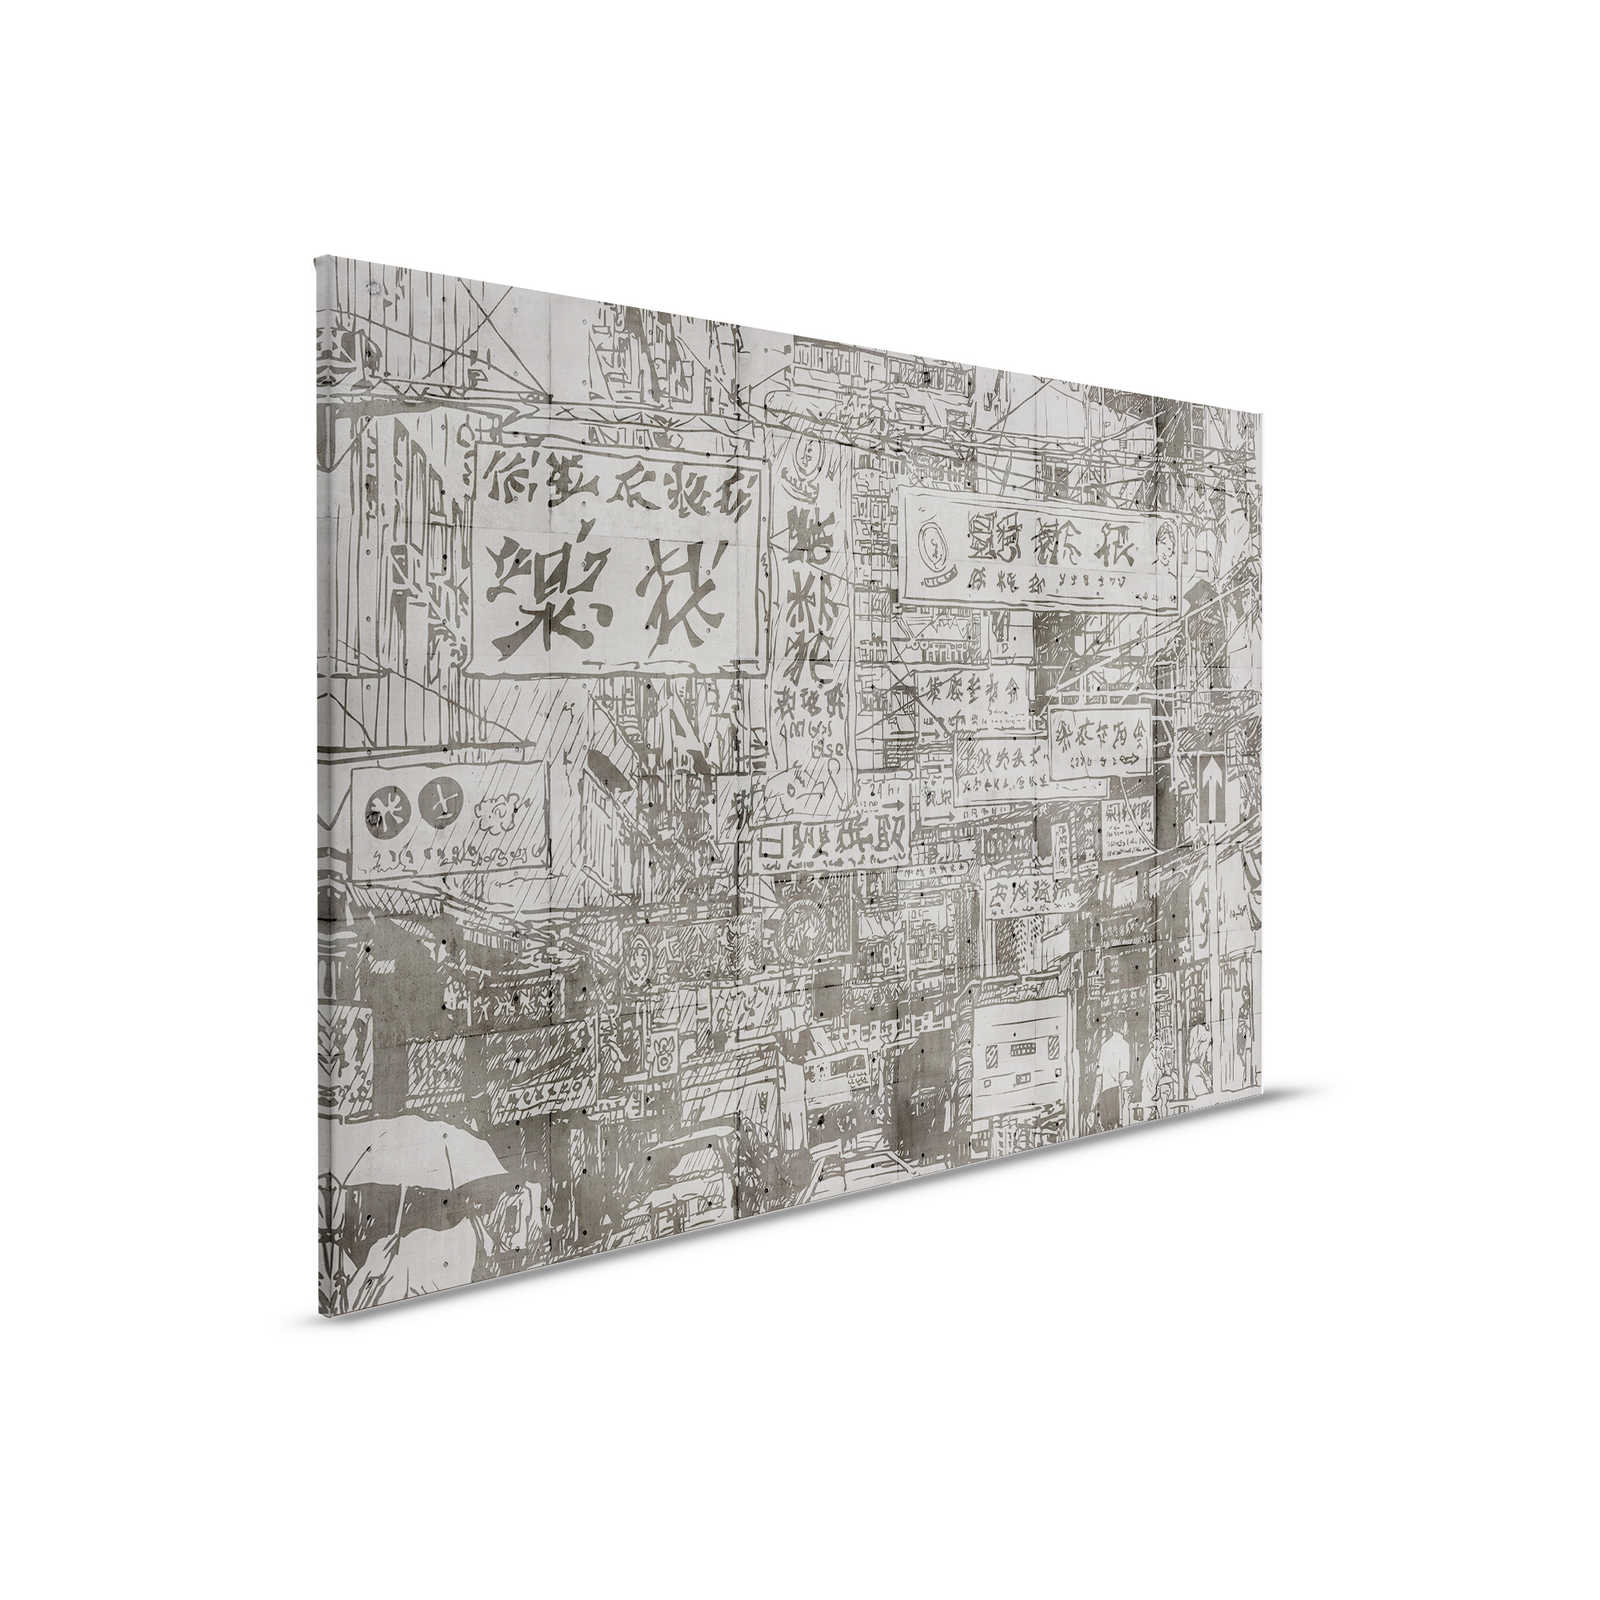 Downtown 1- Canvas painting with China look in concrete structure - 0.90 m x 0.60 m
